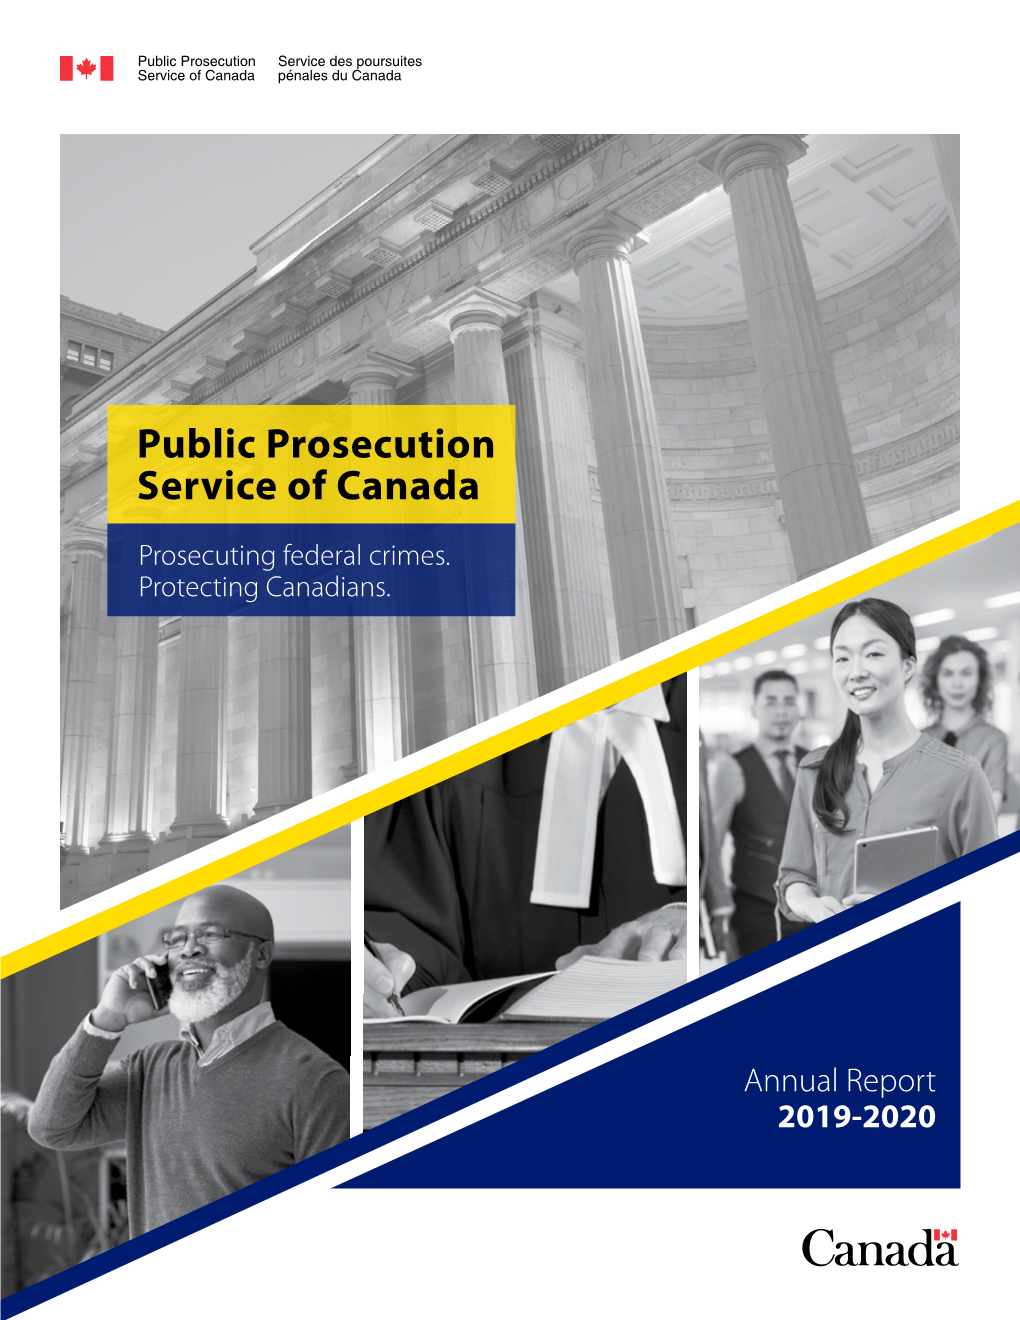 2019-2020 Annual Report of the Public Prosecution Service of Canada